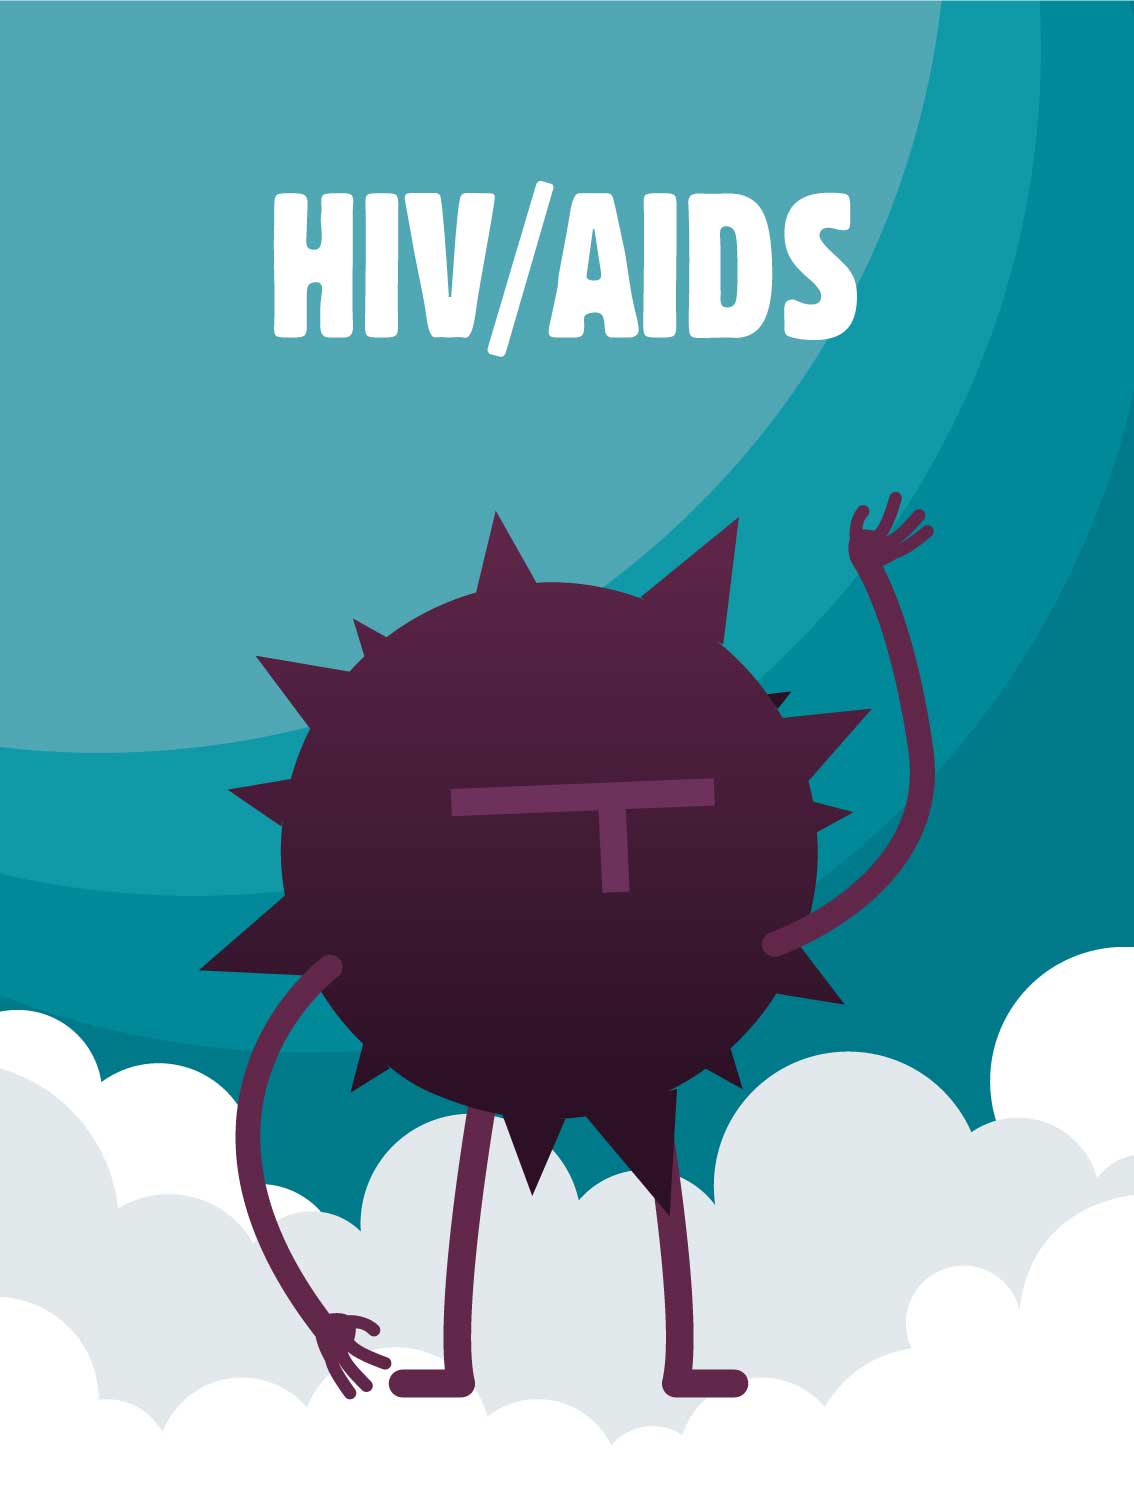 HIV, AIDS, testing, STI, STD, sexually transmitted infection, unsafe sex